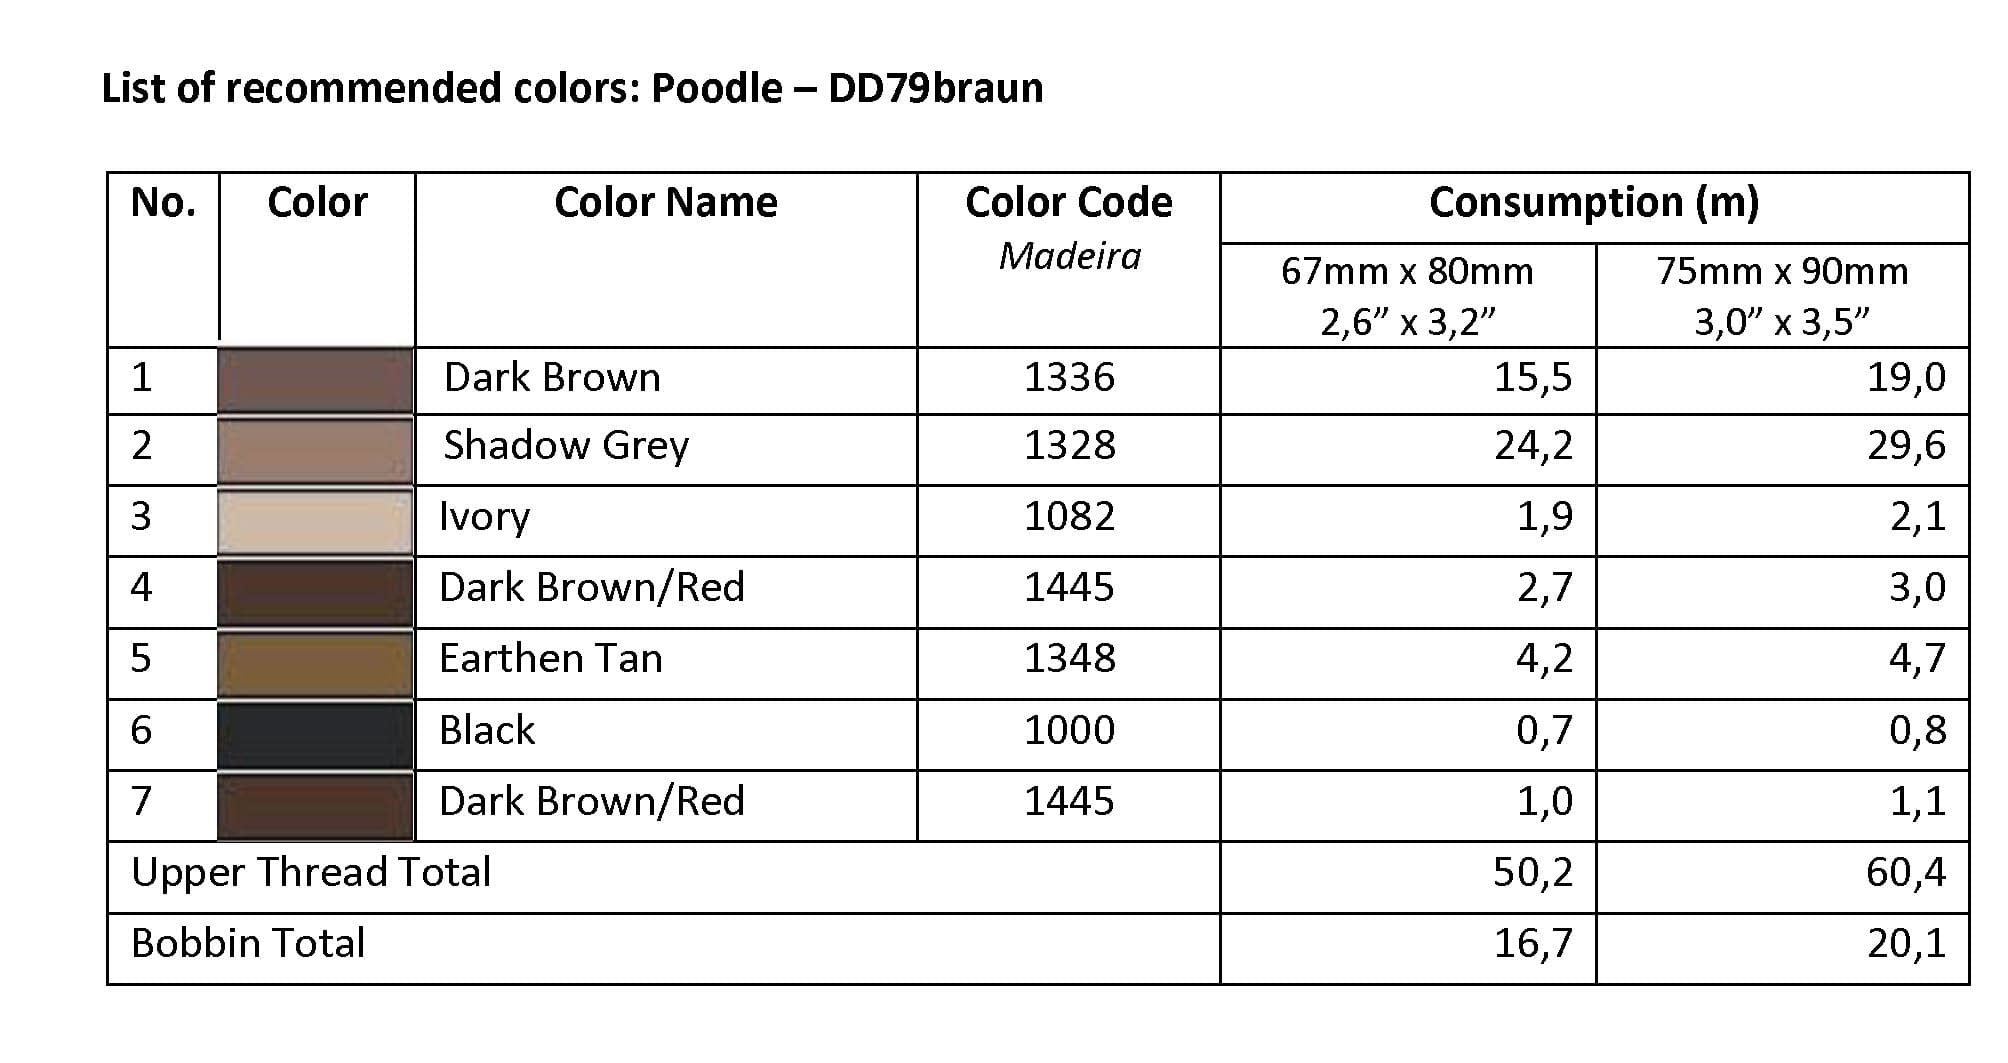 List of Recommended Colors -  Poodle DD79 braun